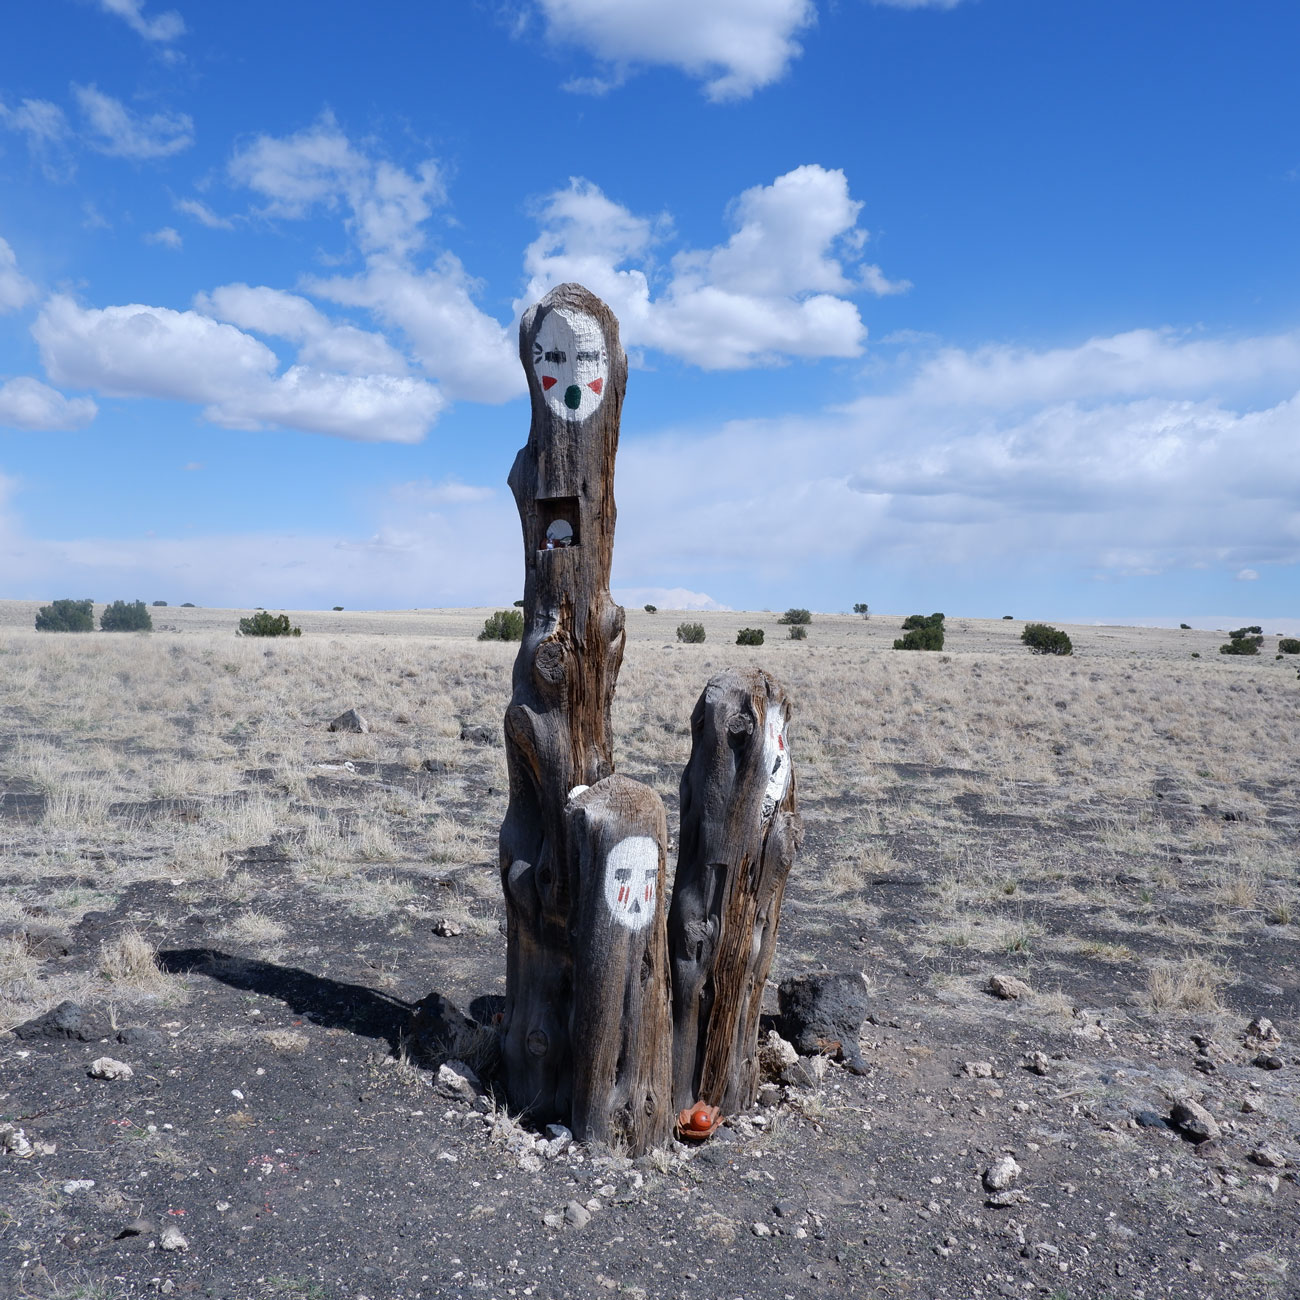 A photo of a sculpture in the high desert with a blue sky and clouds behind.